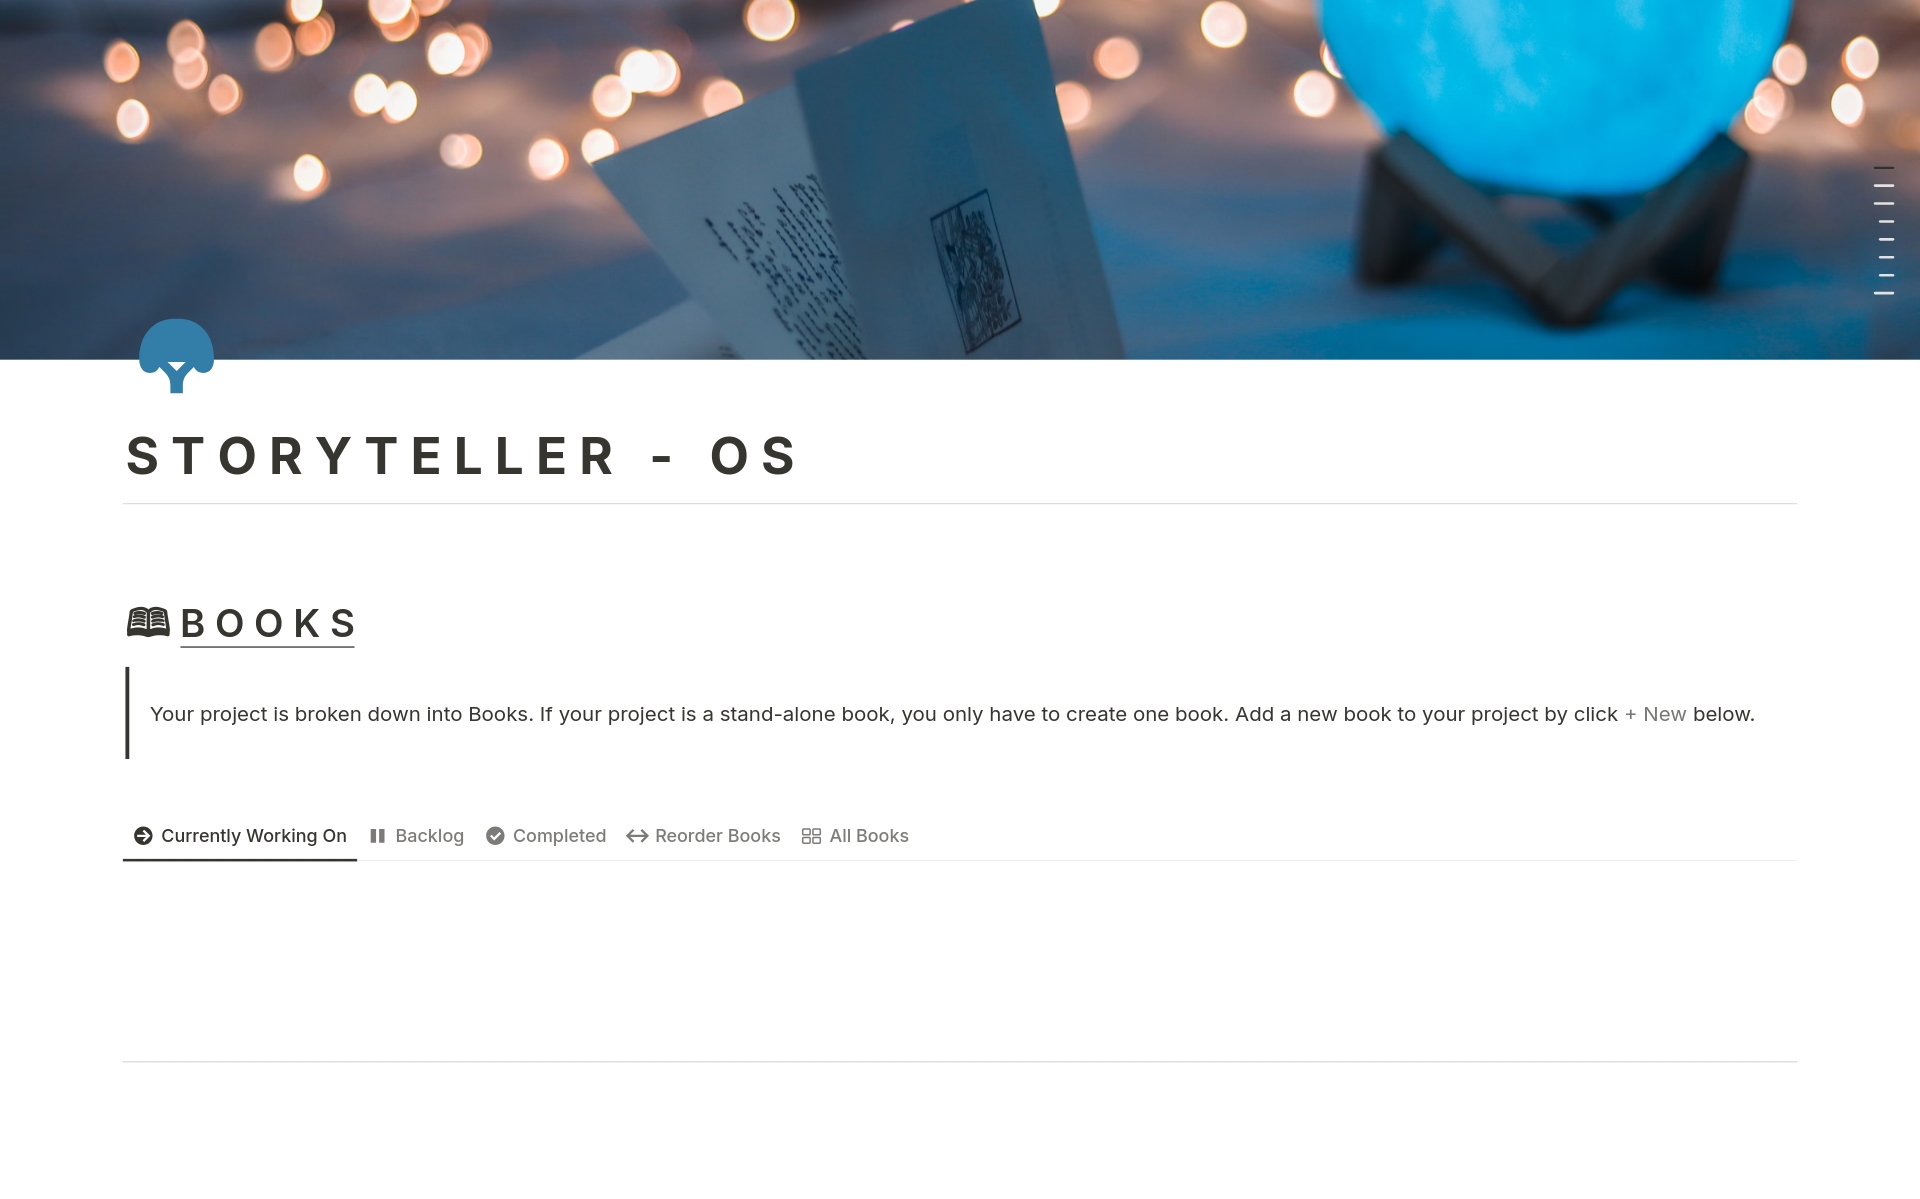 Begin crafting your stories effortlessly with Storyteller OS. This Notion-based system interconnects every aspect of your story, from characters to plot, ensuring consistency and boosting productivity. Stay motivated and achieve your writing goals with ease. Start to